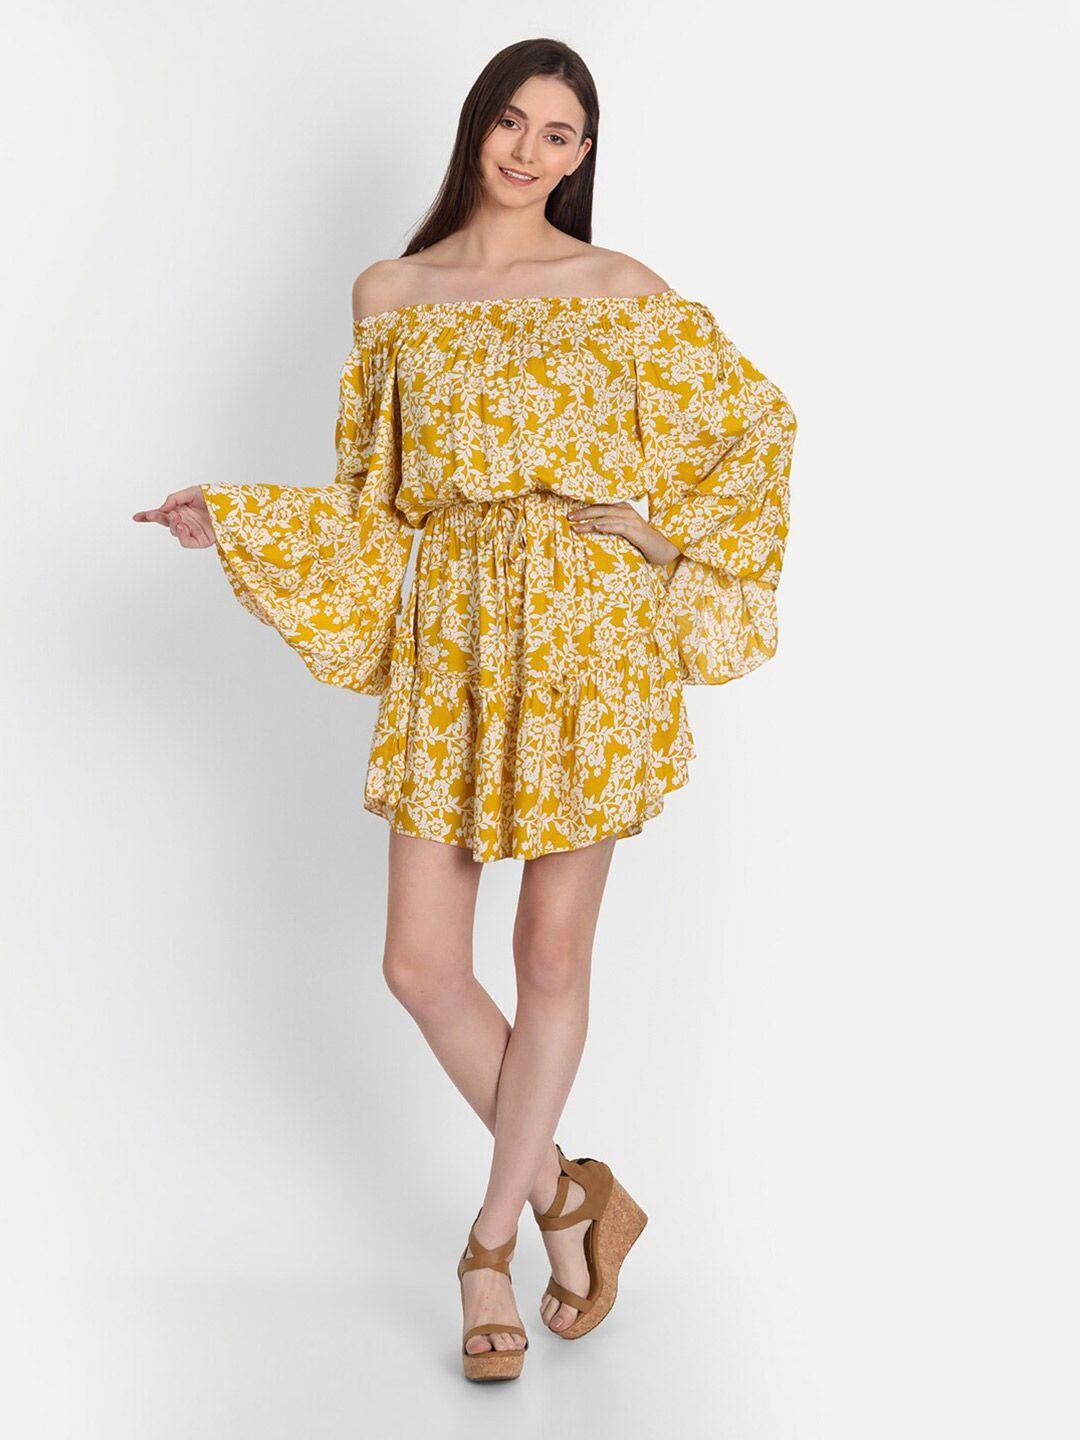 iki chic yellow floral off-shoulder mini dress